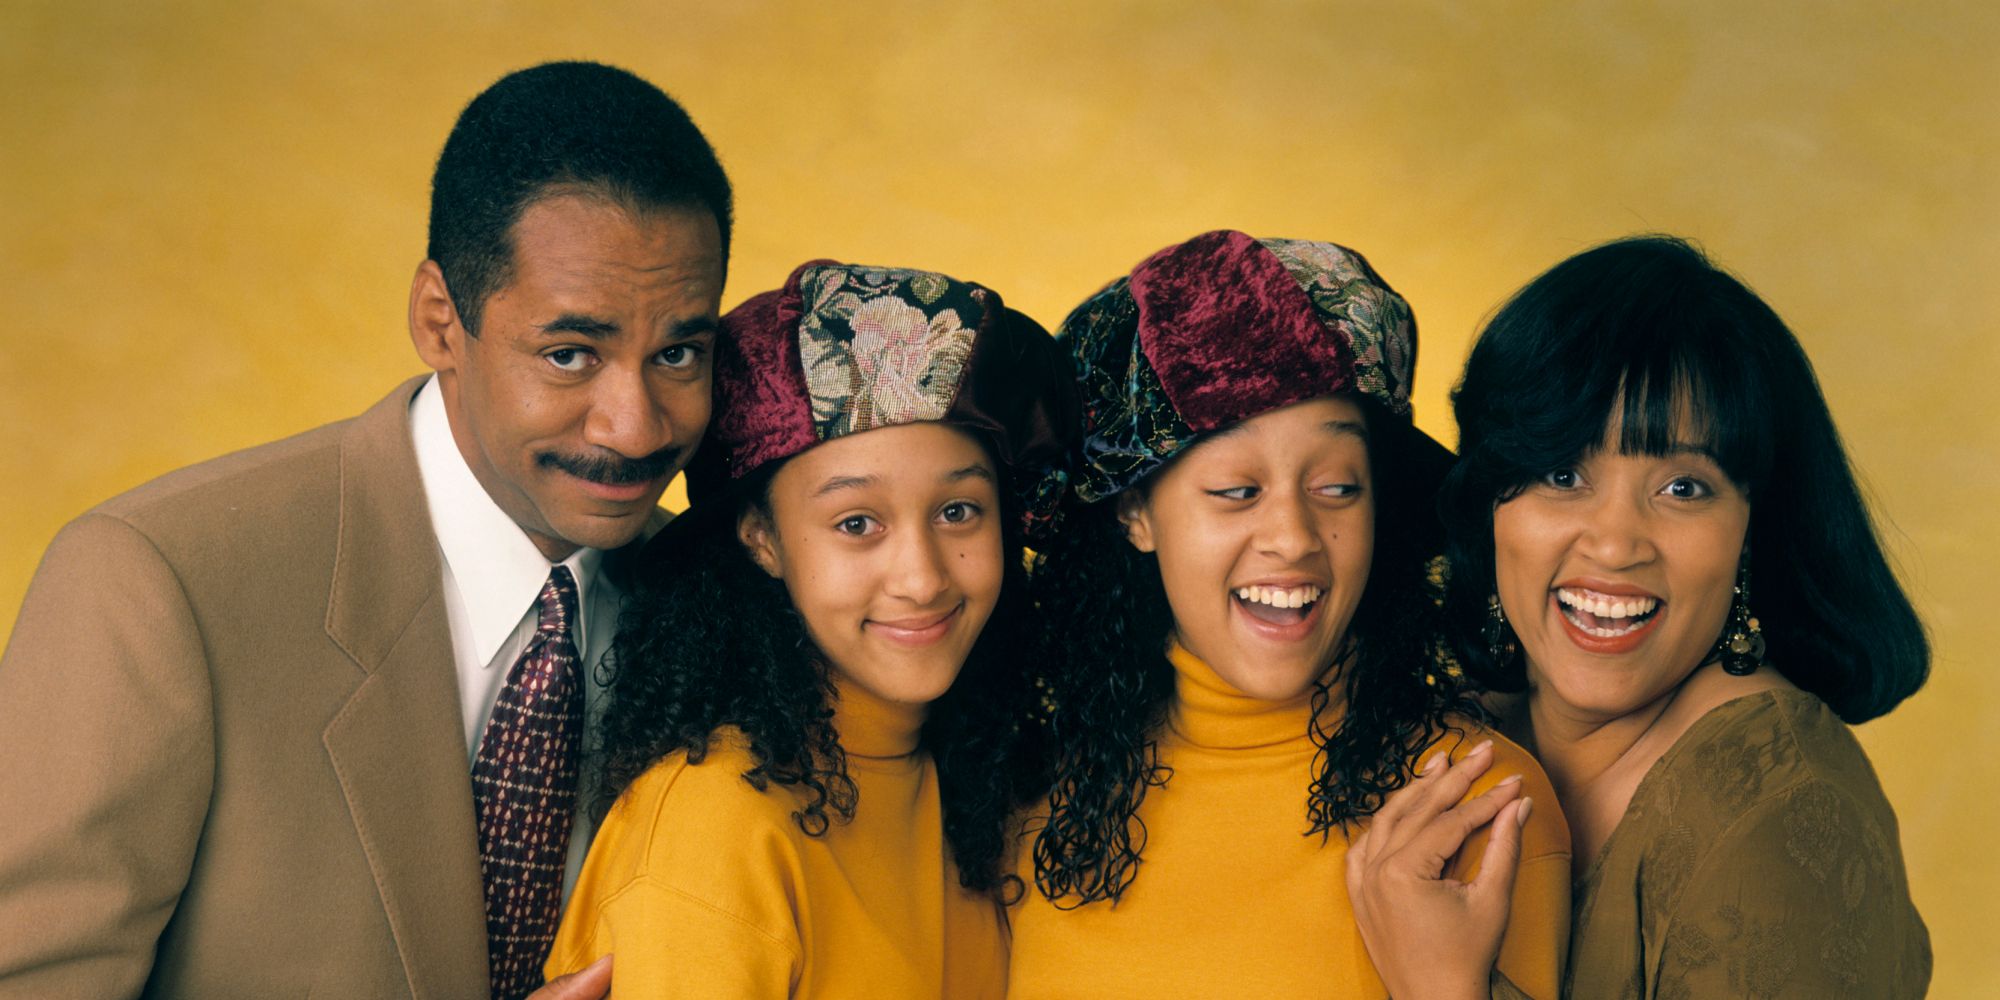 10 FanFavorite Sister Sister Episodes To Rewatch On Netflix Ranked By IMDb